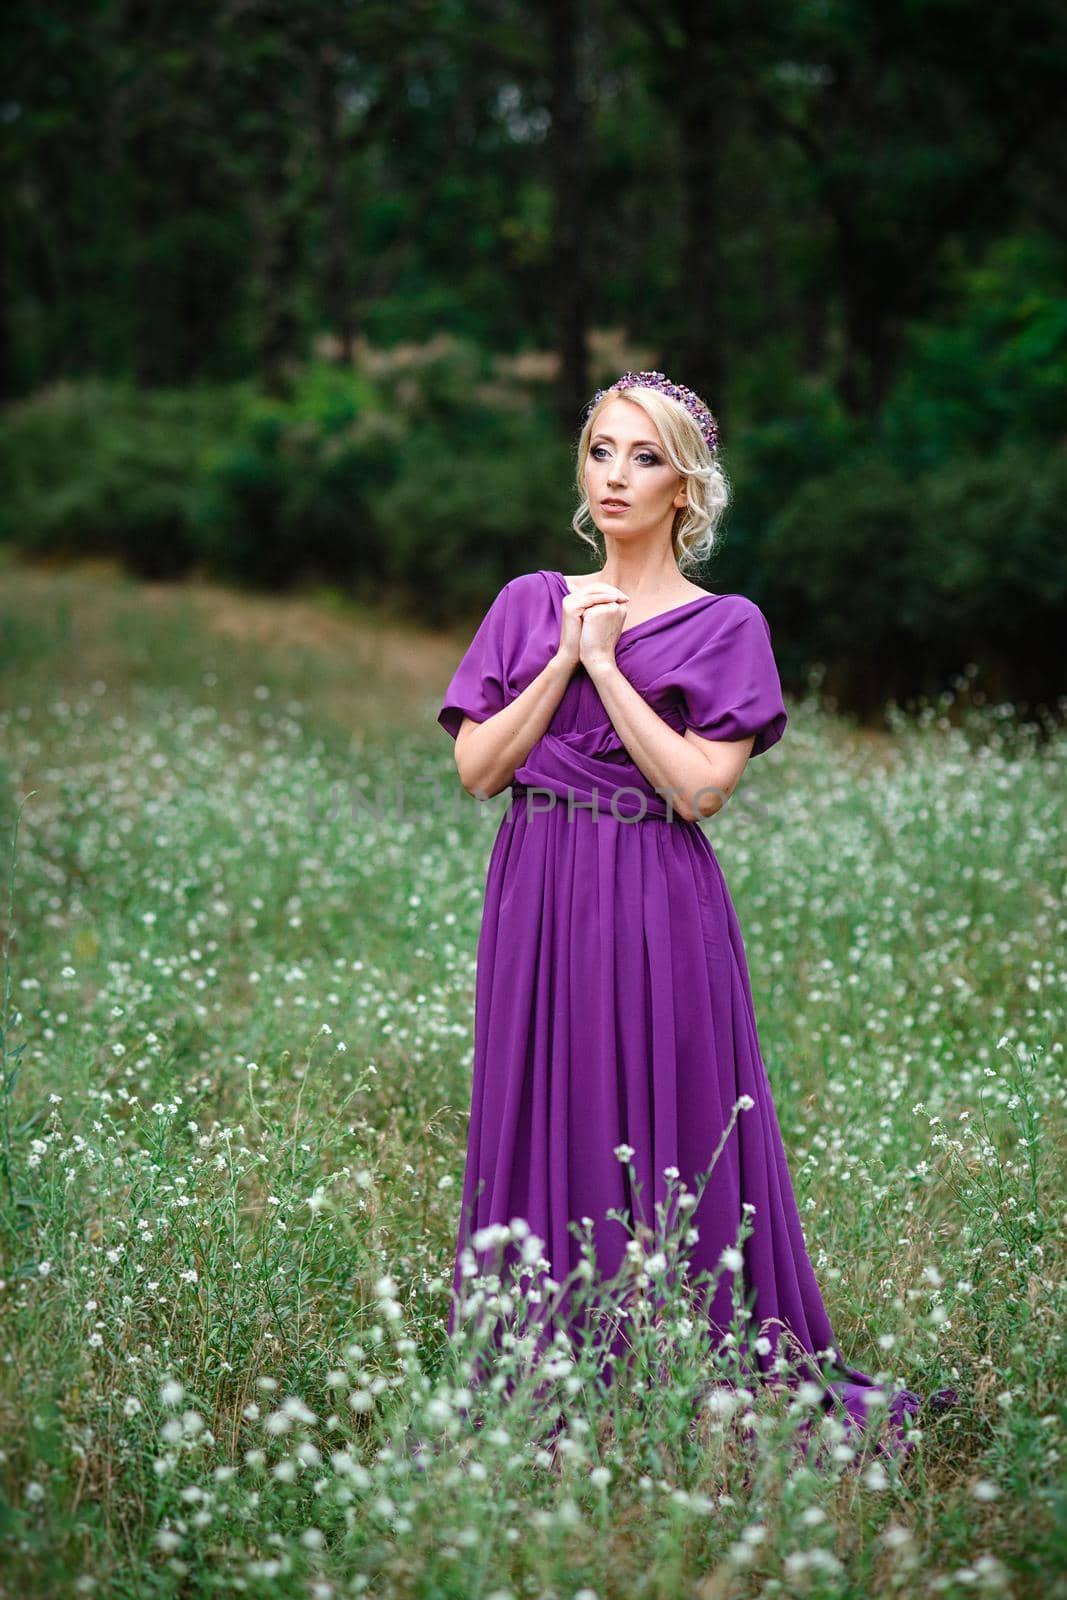 Girl model blonde in a lilac dress with a bouquet with a green forest